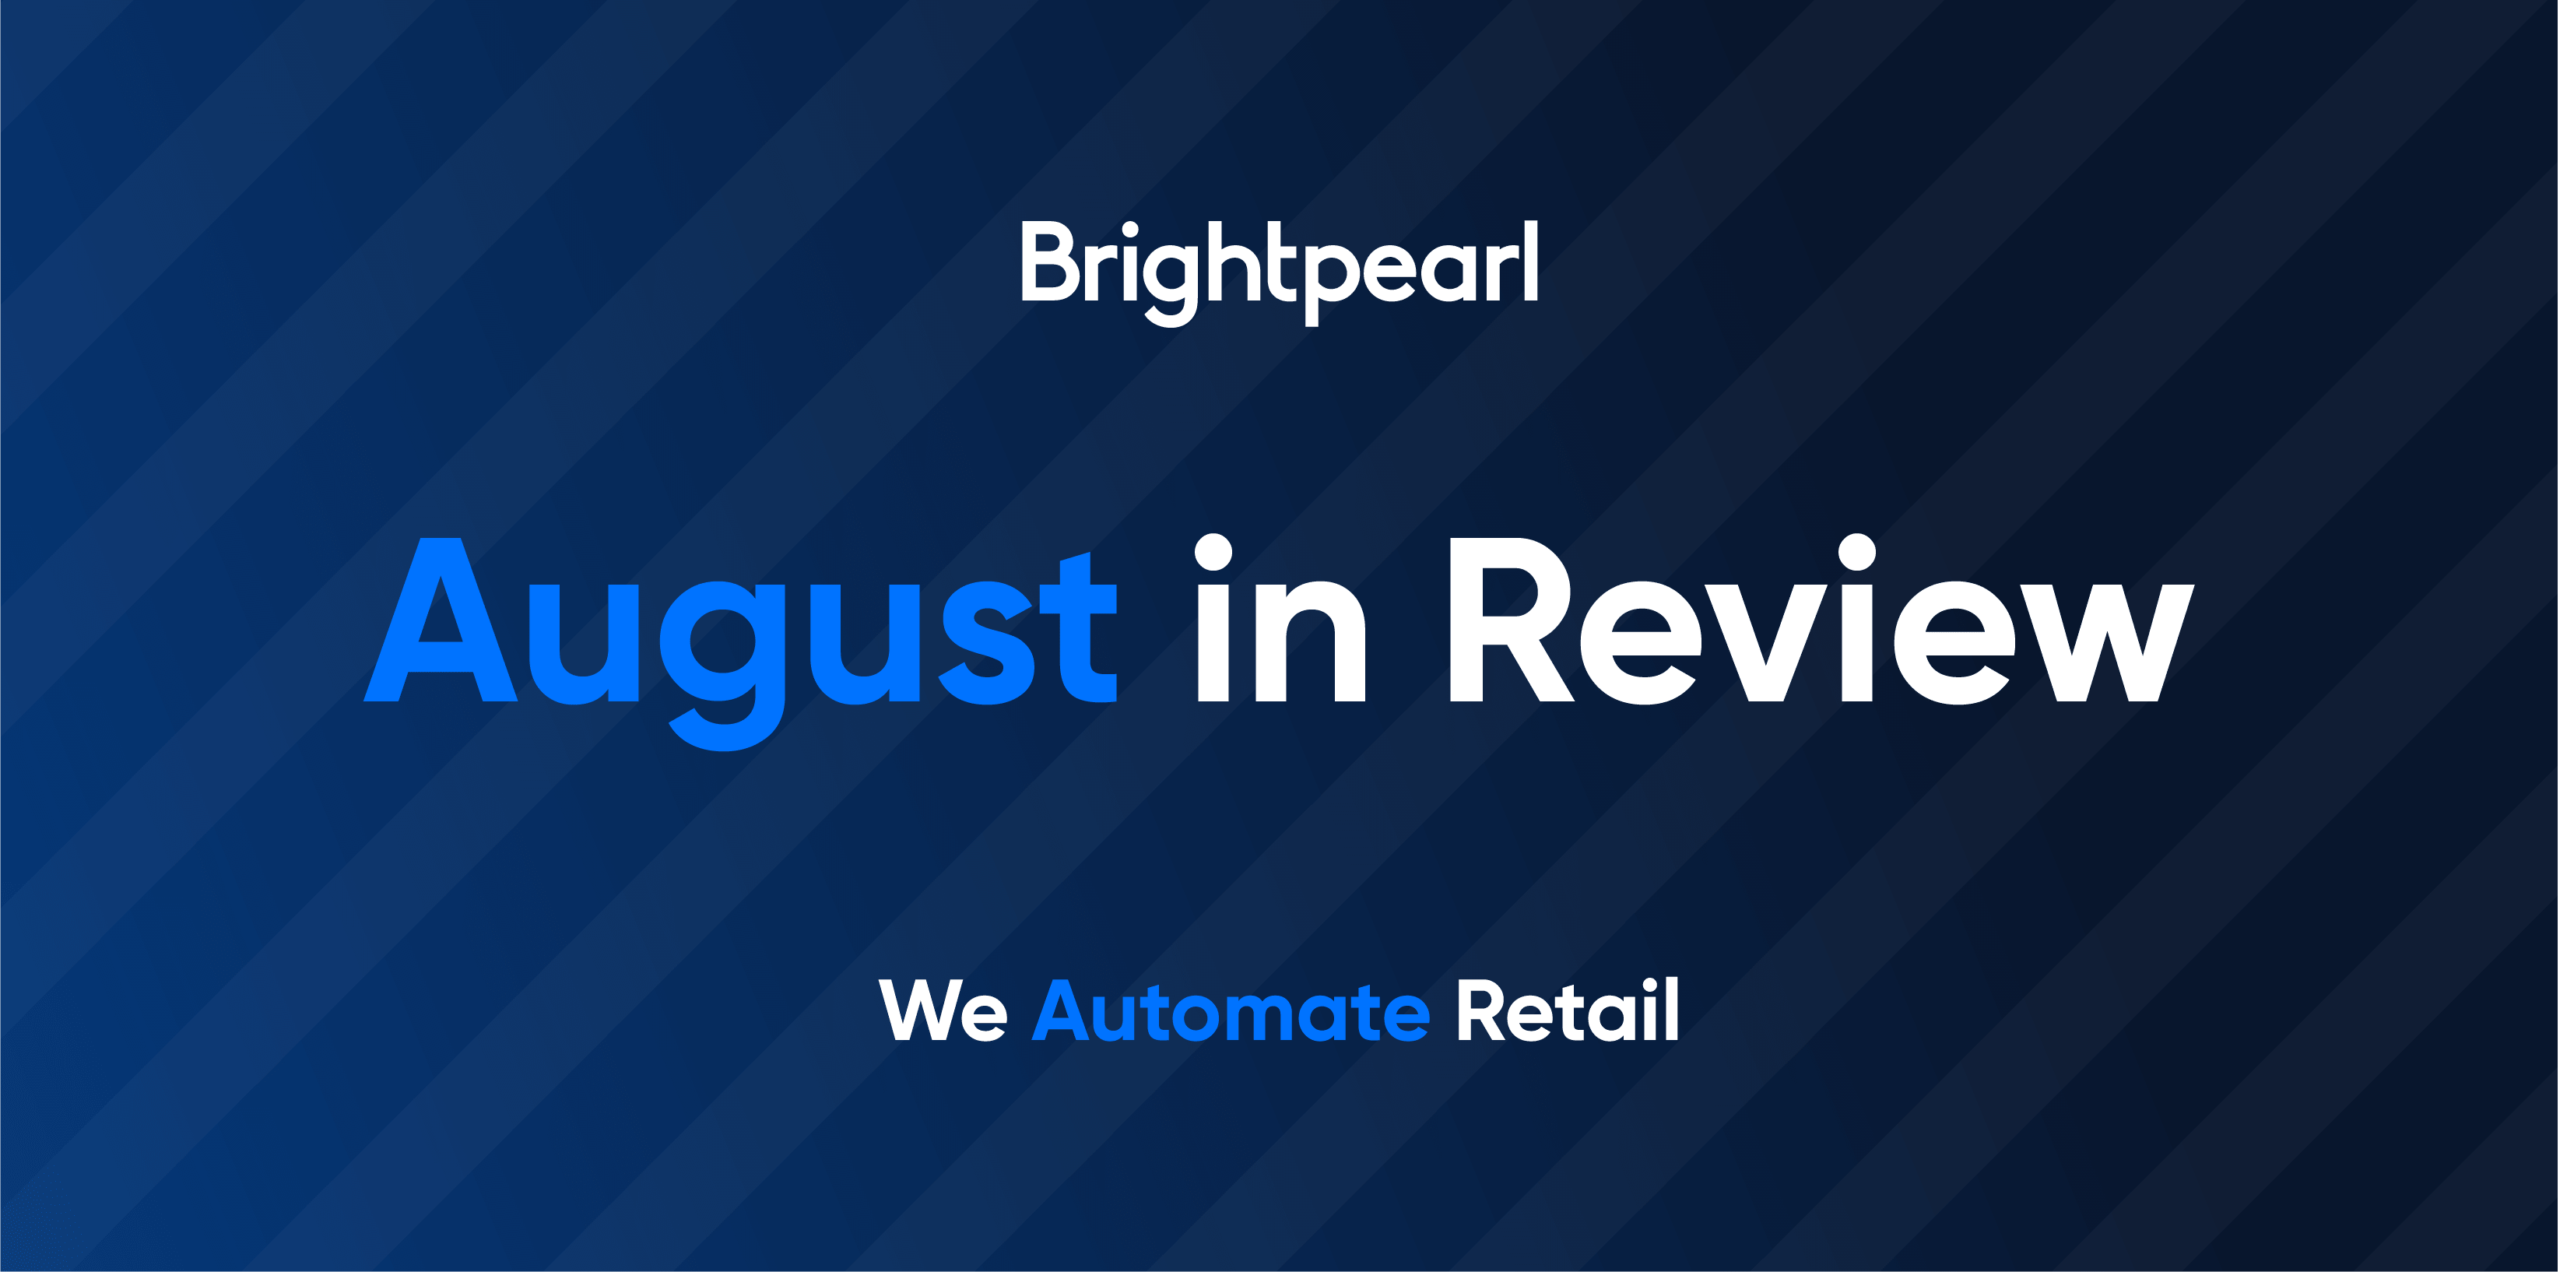 August: In Review 2018